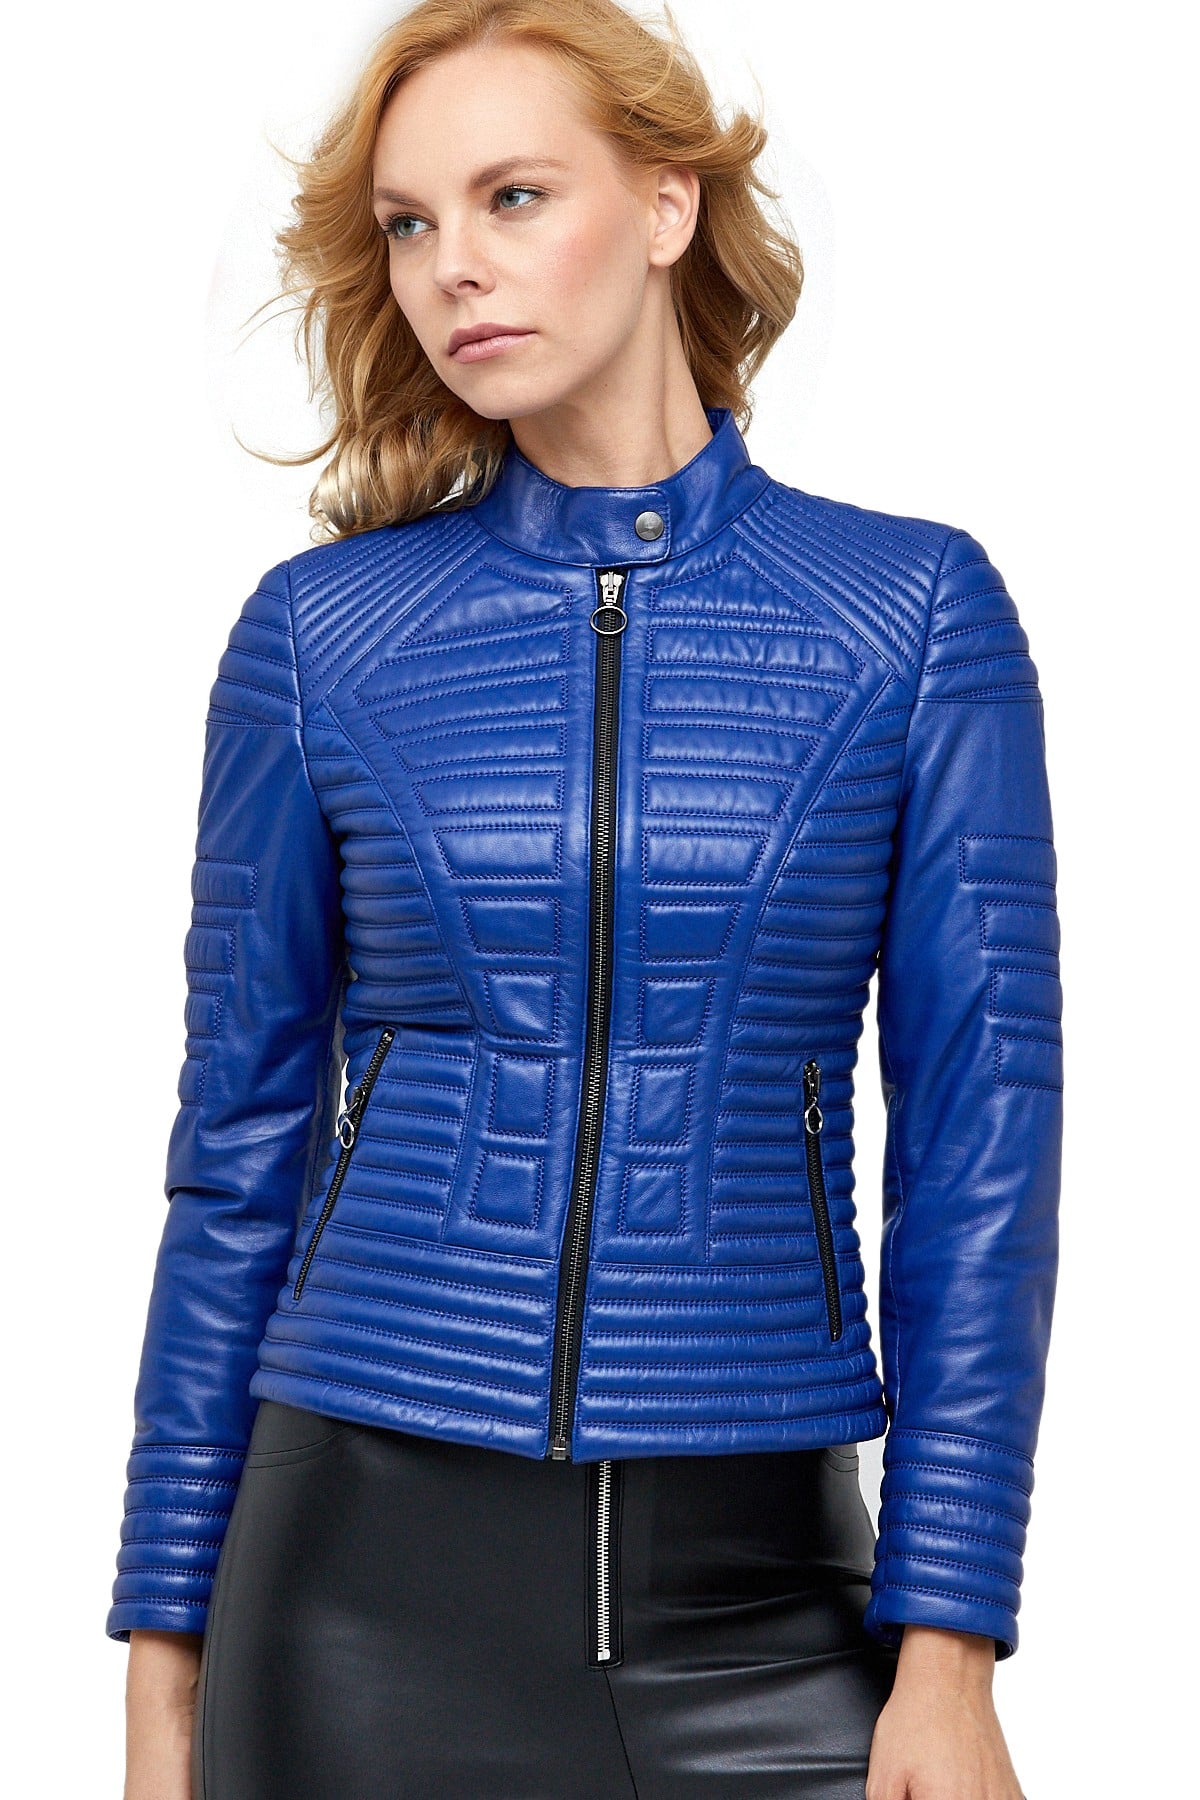 Genuine Leather Motorcycle Jacket in Blue Available for Sale